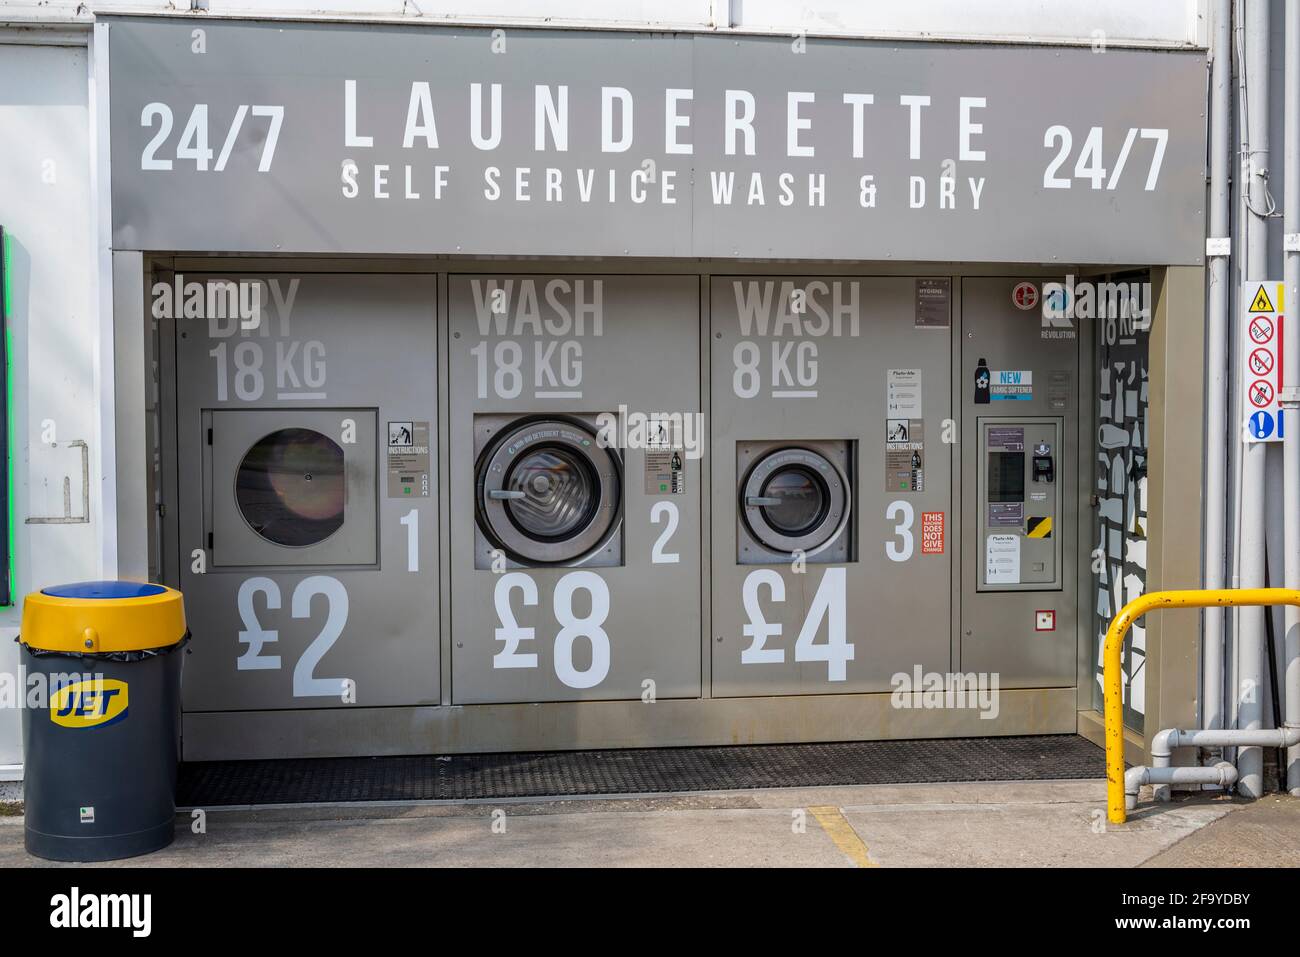 Self service 24/7 laundrette at a service station in Hawkwell, Essex, UK. Automatic, automated clothes washing machines, outside, on garage forecourt Stock Photo